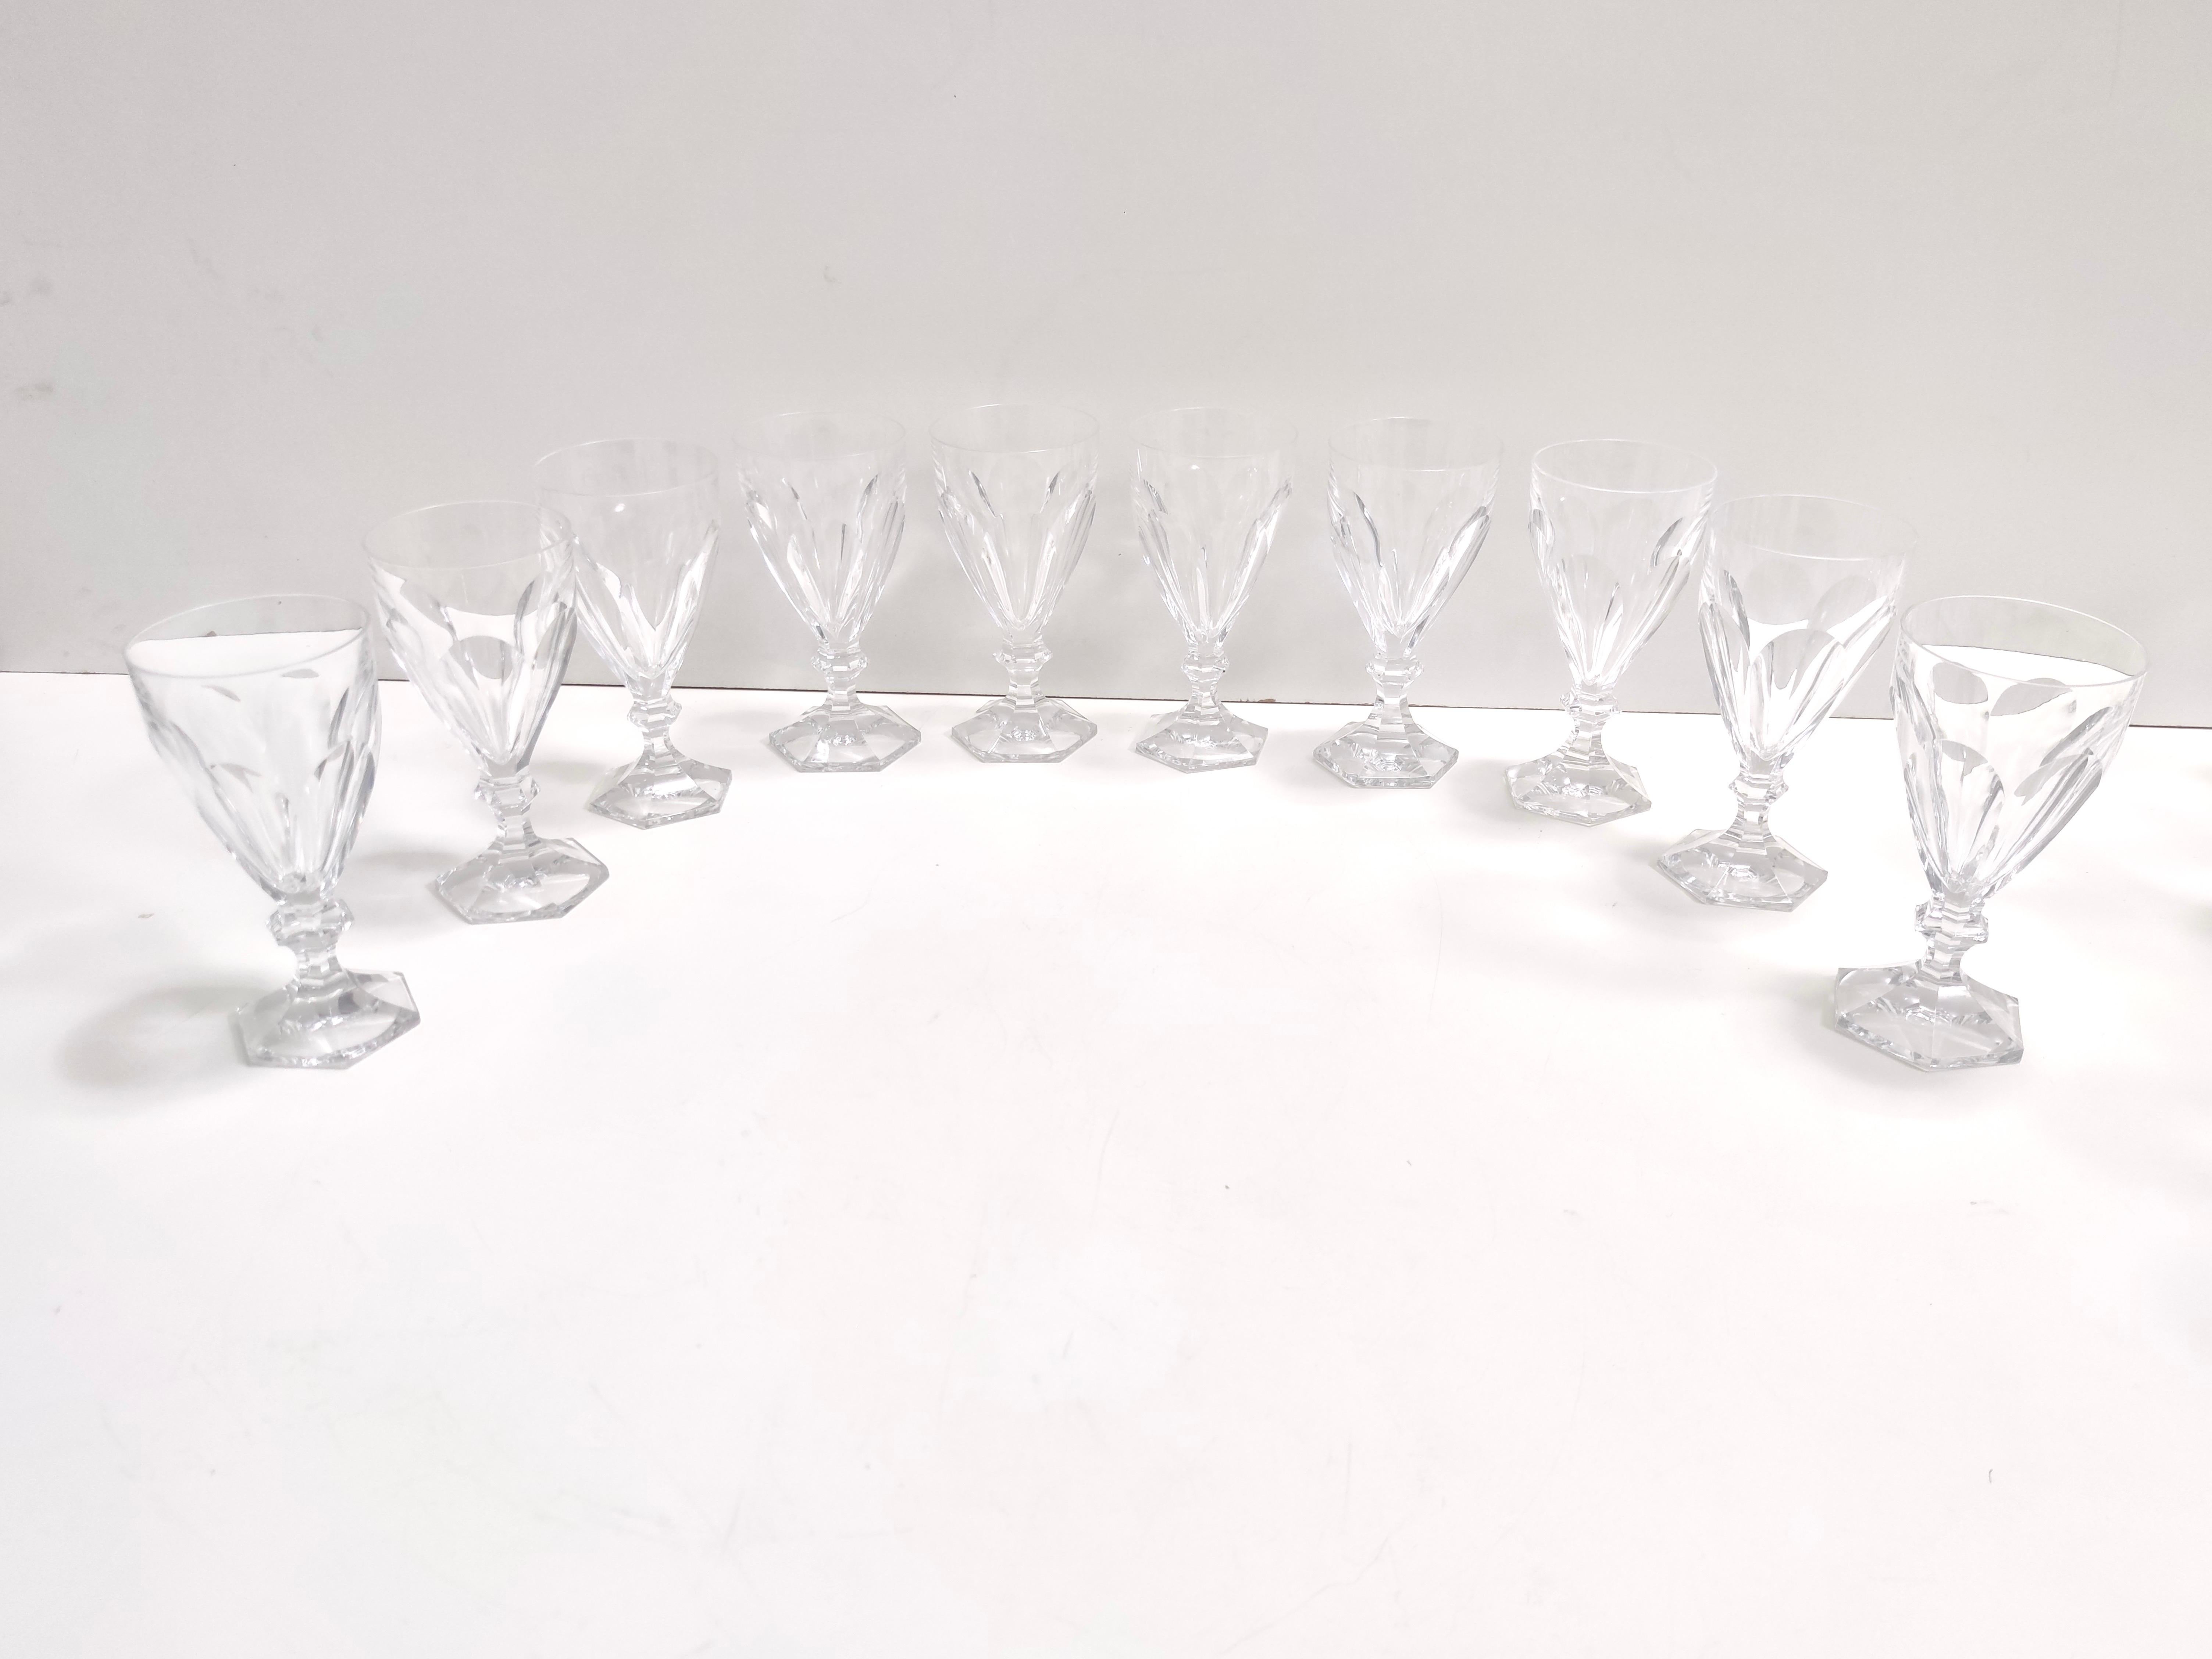 Postmodern Set of Eighteen Solid Crystal Drinking Glasses by Kosta Boda, Sweden In Excellent Condition For Sale In Bresso, Lombardy